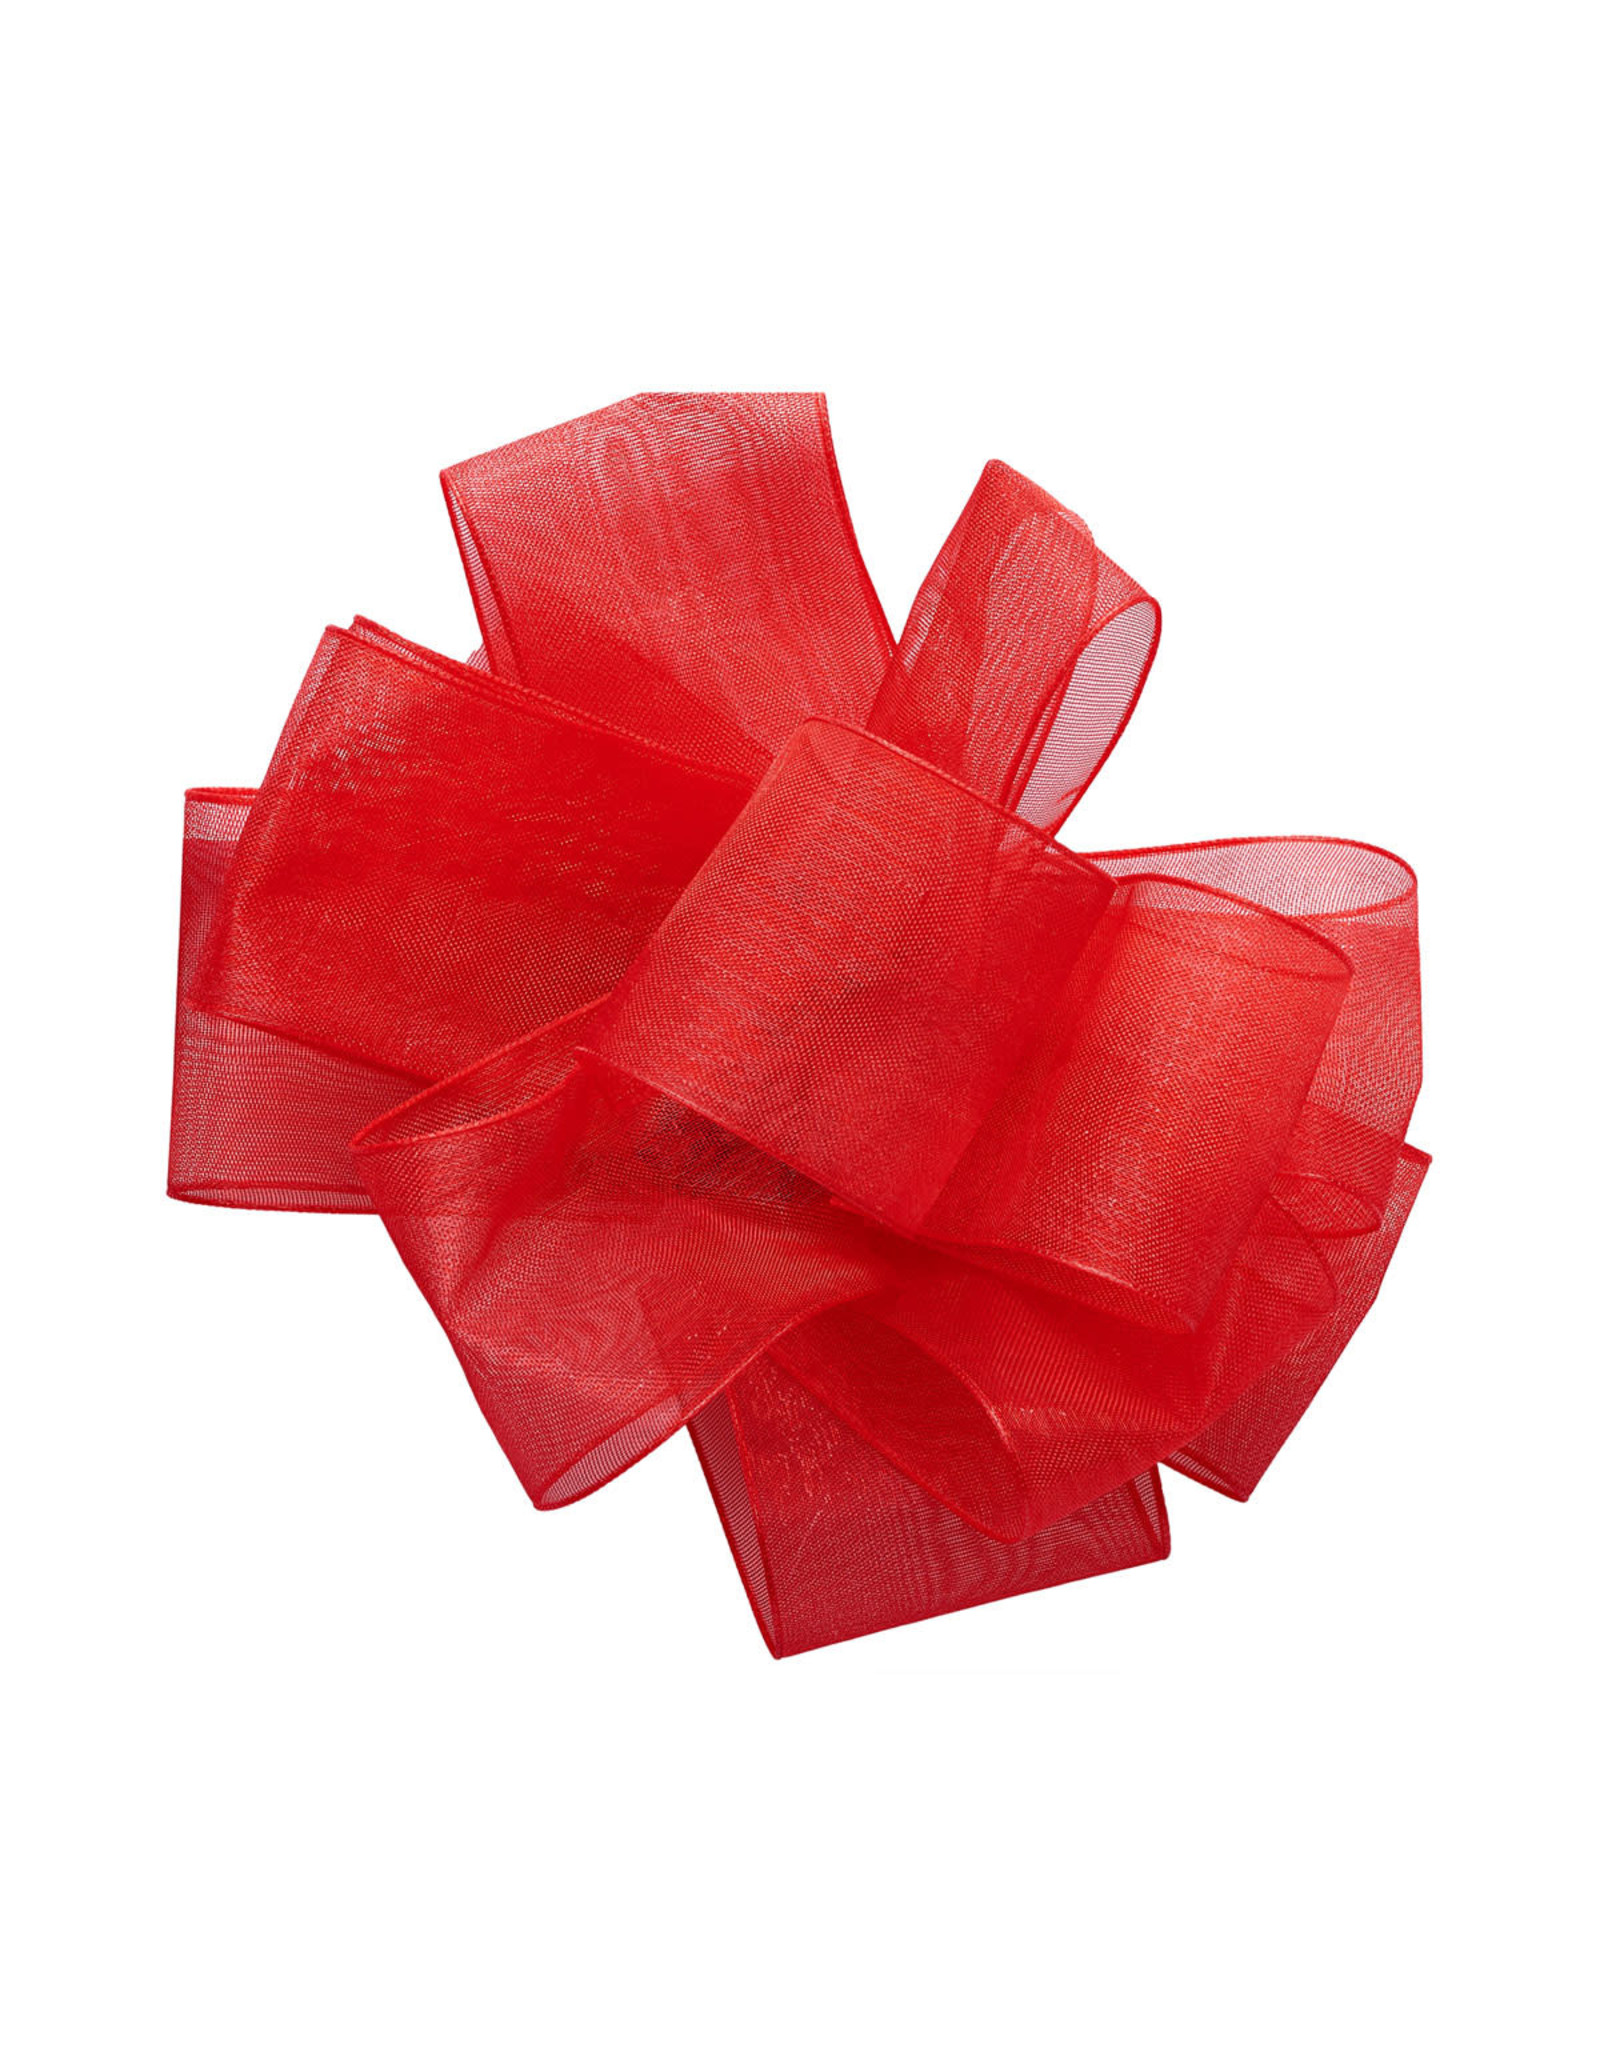 PAPYRUS® Gift Bows Red Sheer Organza Pom Pom Bow